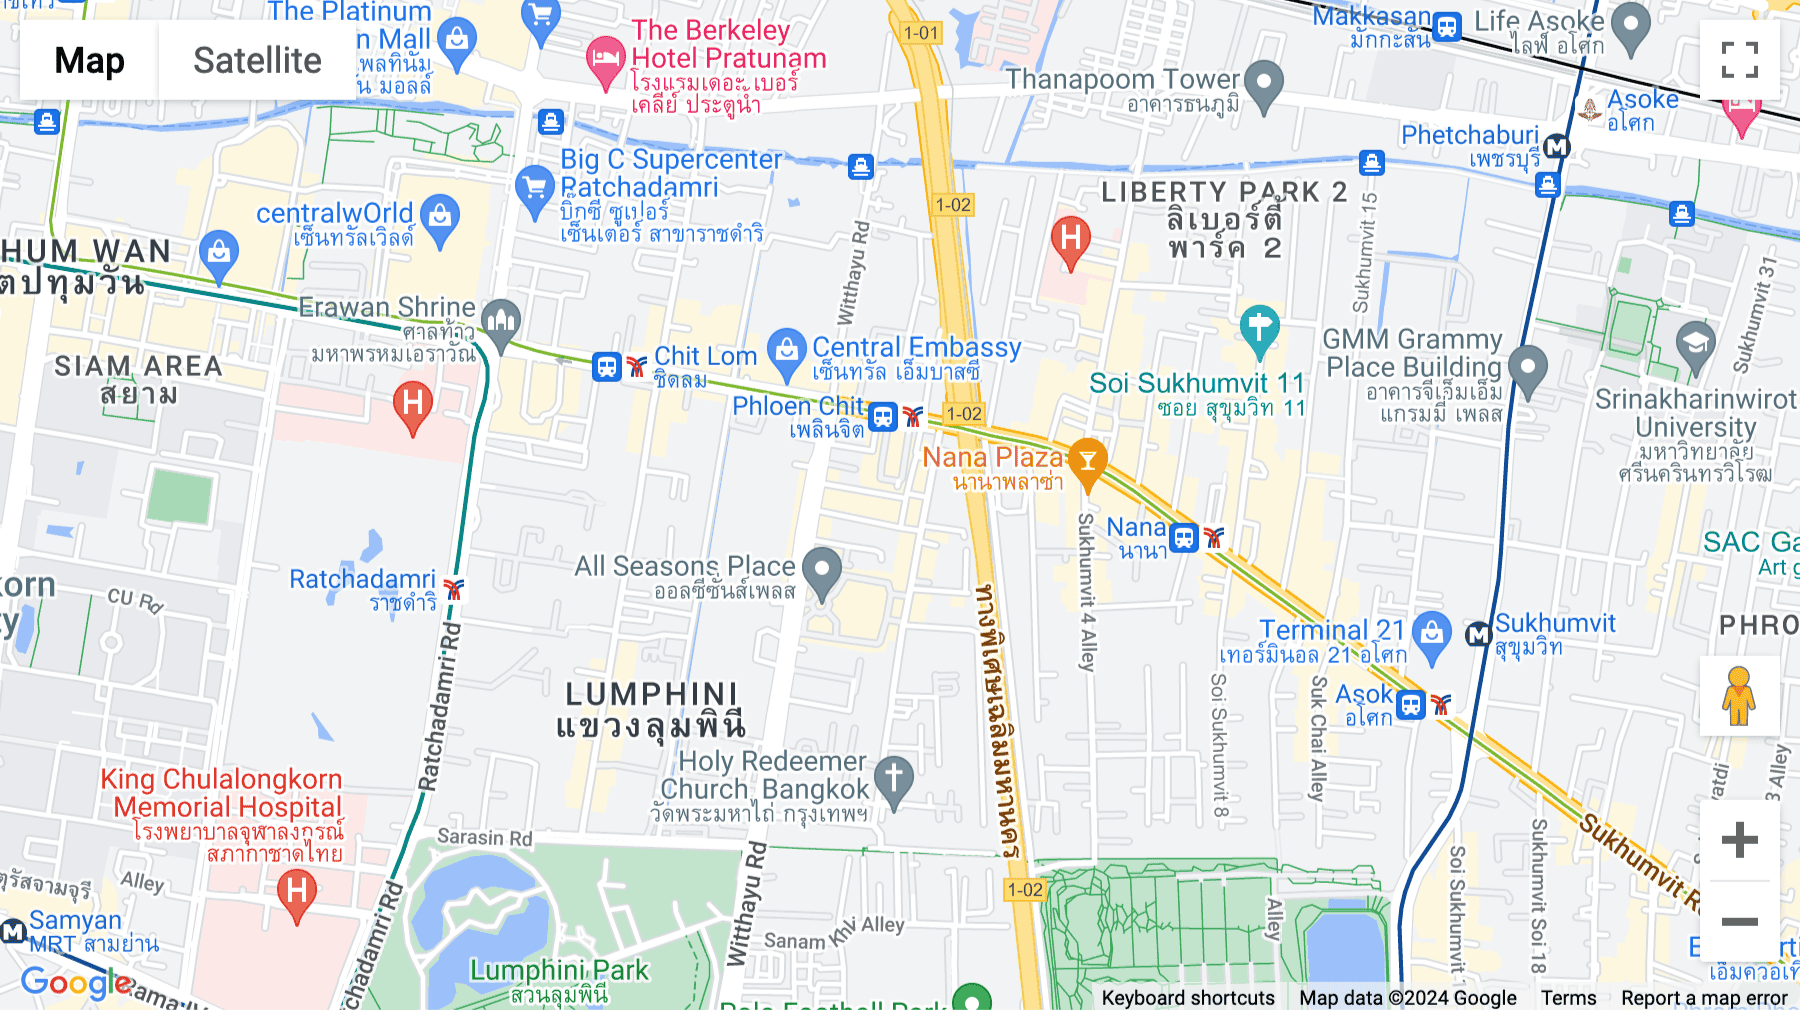 Click for interative map of Athenee Tower, 63 Wireless Road, Bangkok